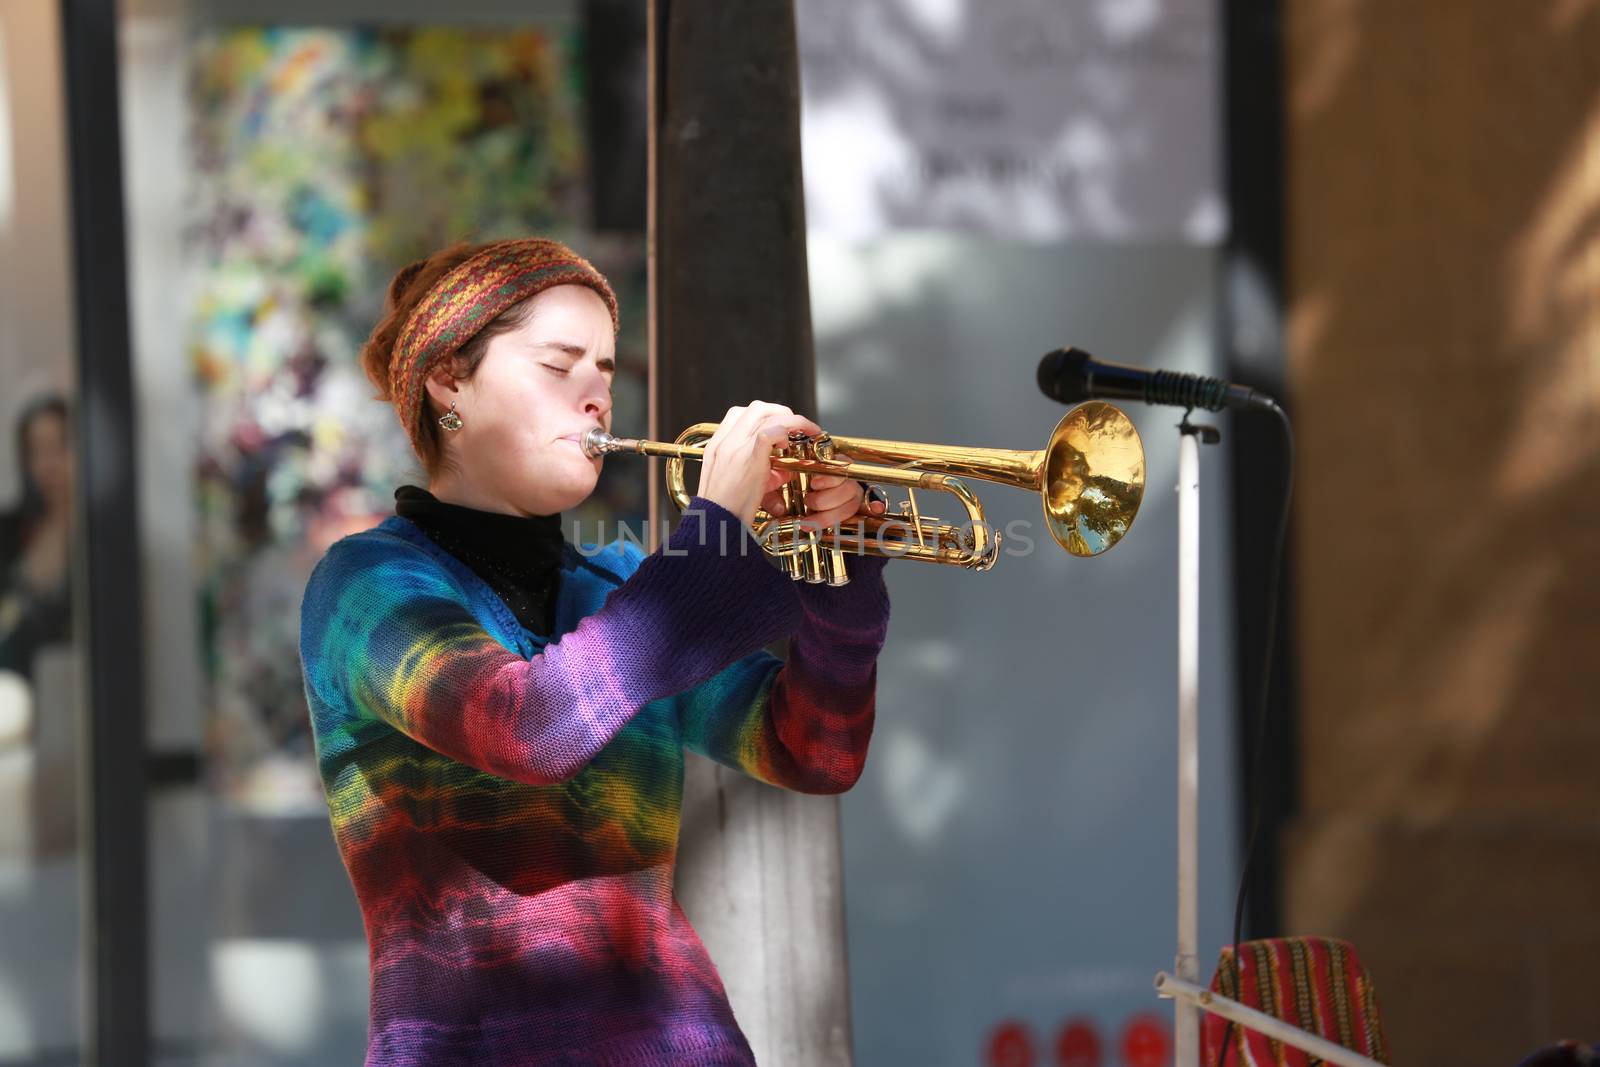 Aix-En-Provence, France - October 21, 2016: Young Woman Playing the Trumpet in the Street (Cours Mirabeau) in Aix-En-Provence, France